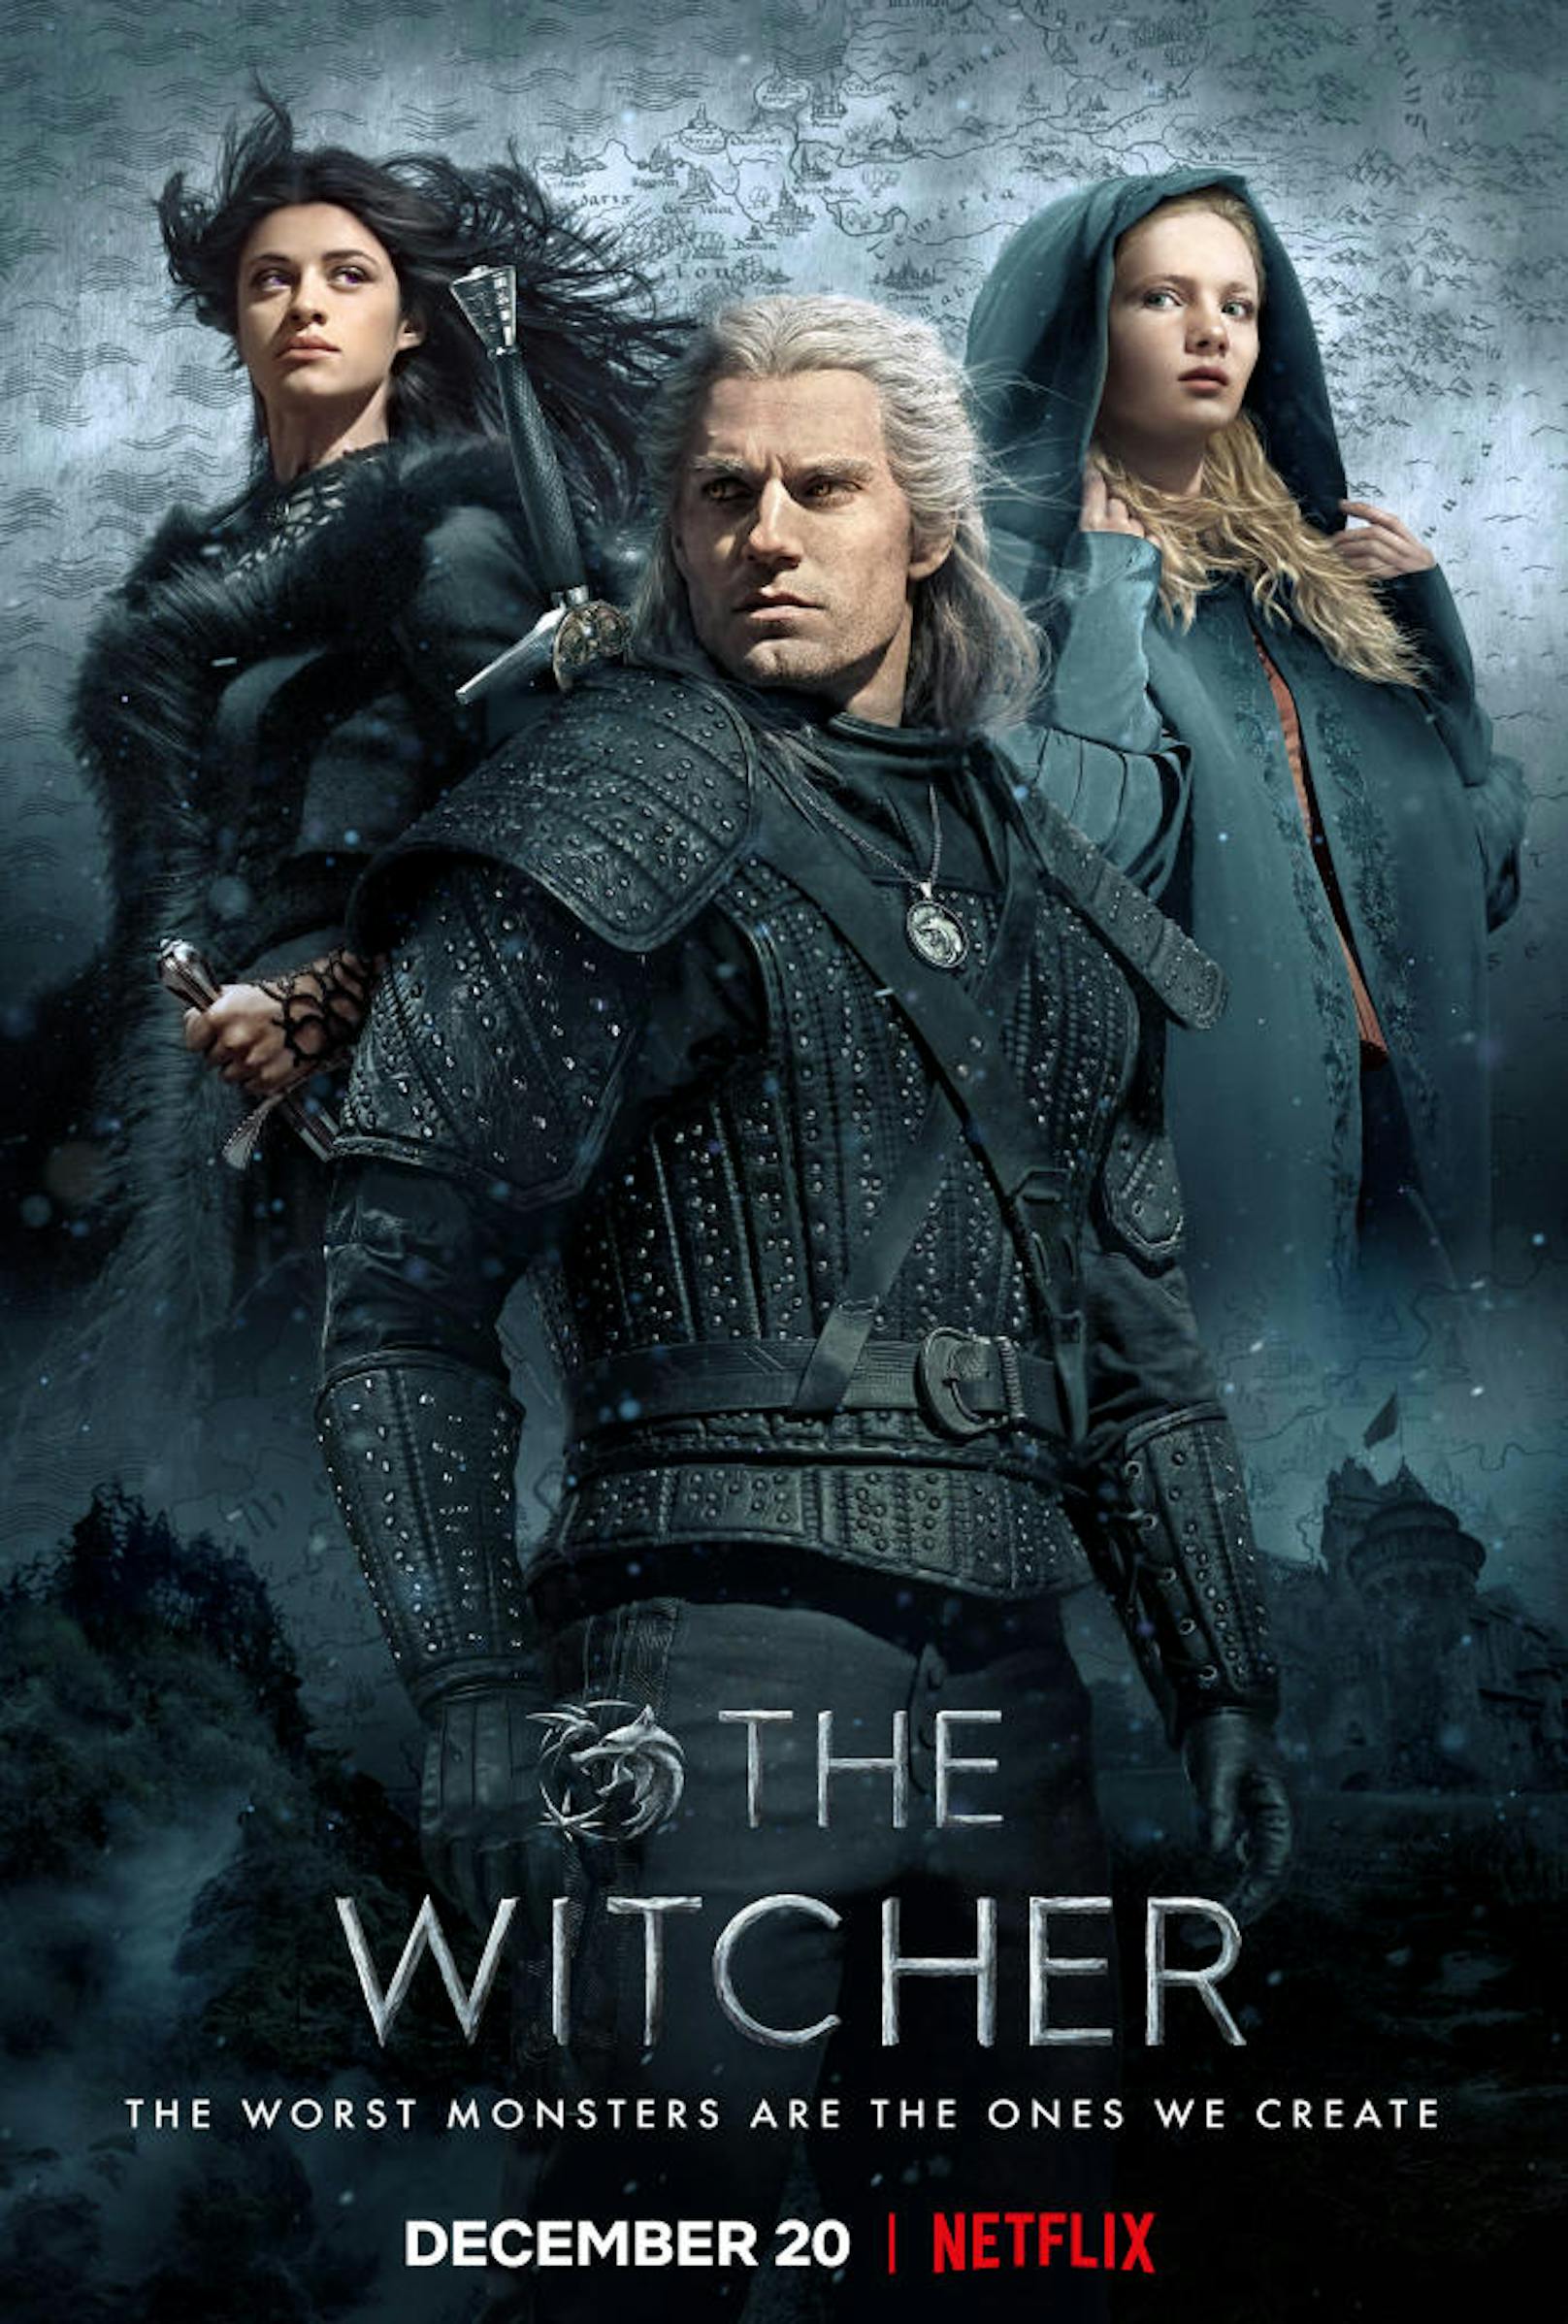 1. "The Witcher" <a href="https://www.heute.at/s/the-witcher-serie-netflix-review-fantasy-start-trailer-kritik-henry-cavill-48424658">HIER die Review zur Serie</a>